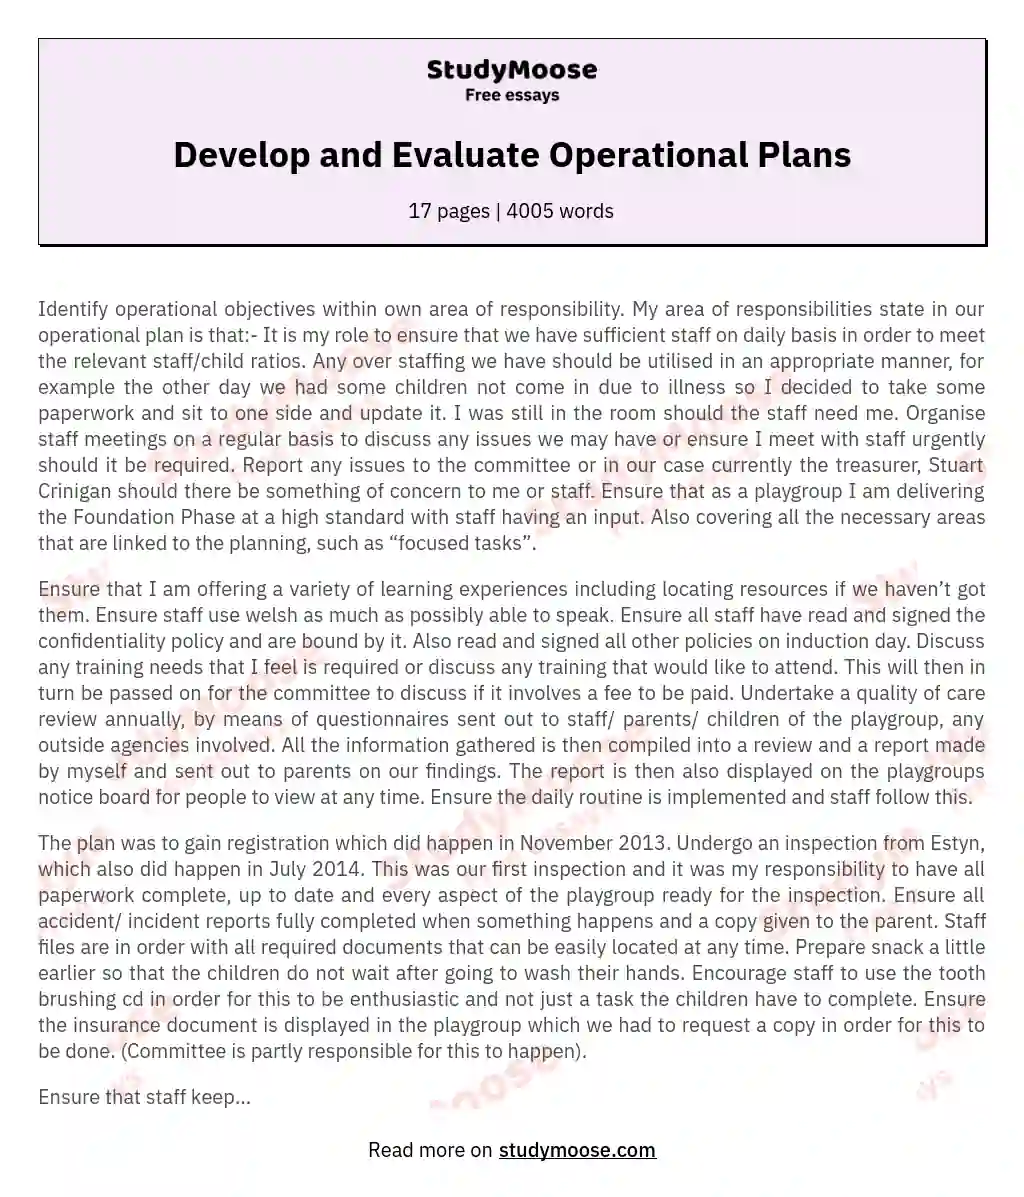 Develop and Evaluate Operational Plans